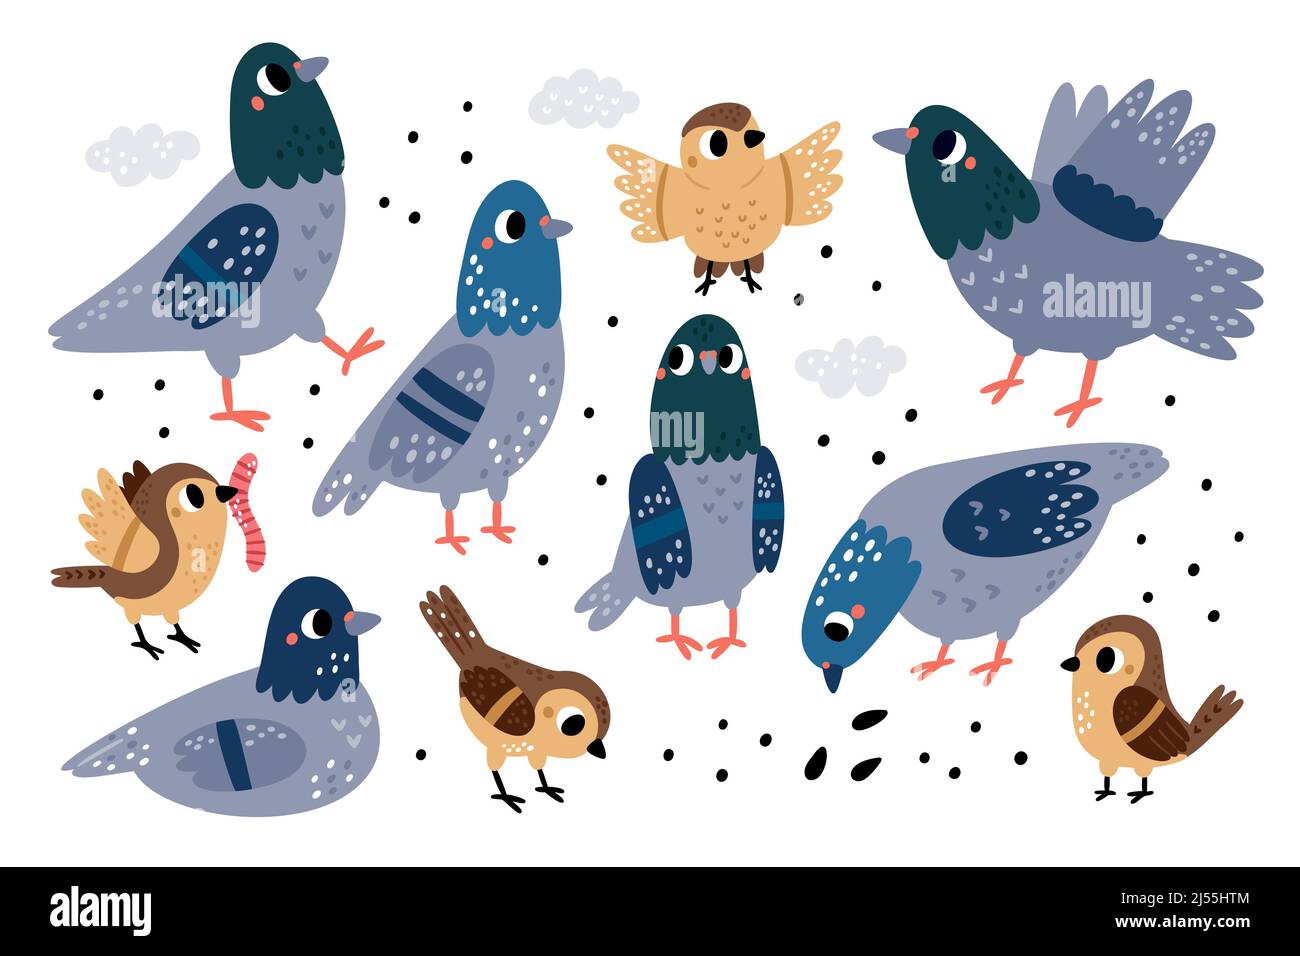 Cute city birds. Funny street sparrows and pigeons. Different poses and actions. Cartoon characters with wings and beaks. Doves pecking grains. Urban Stock Vector